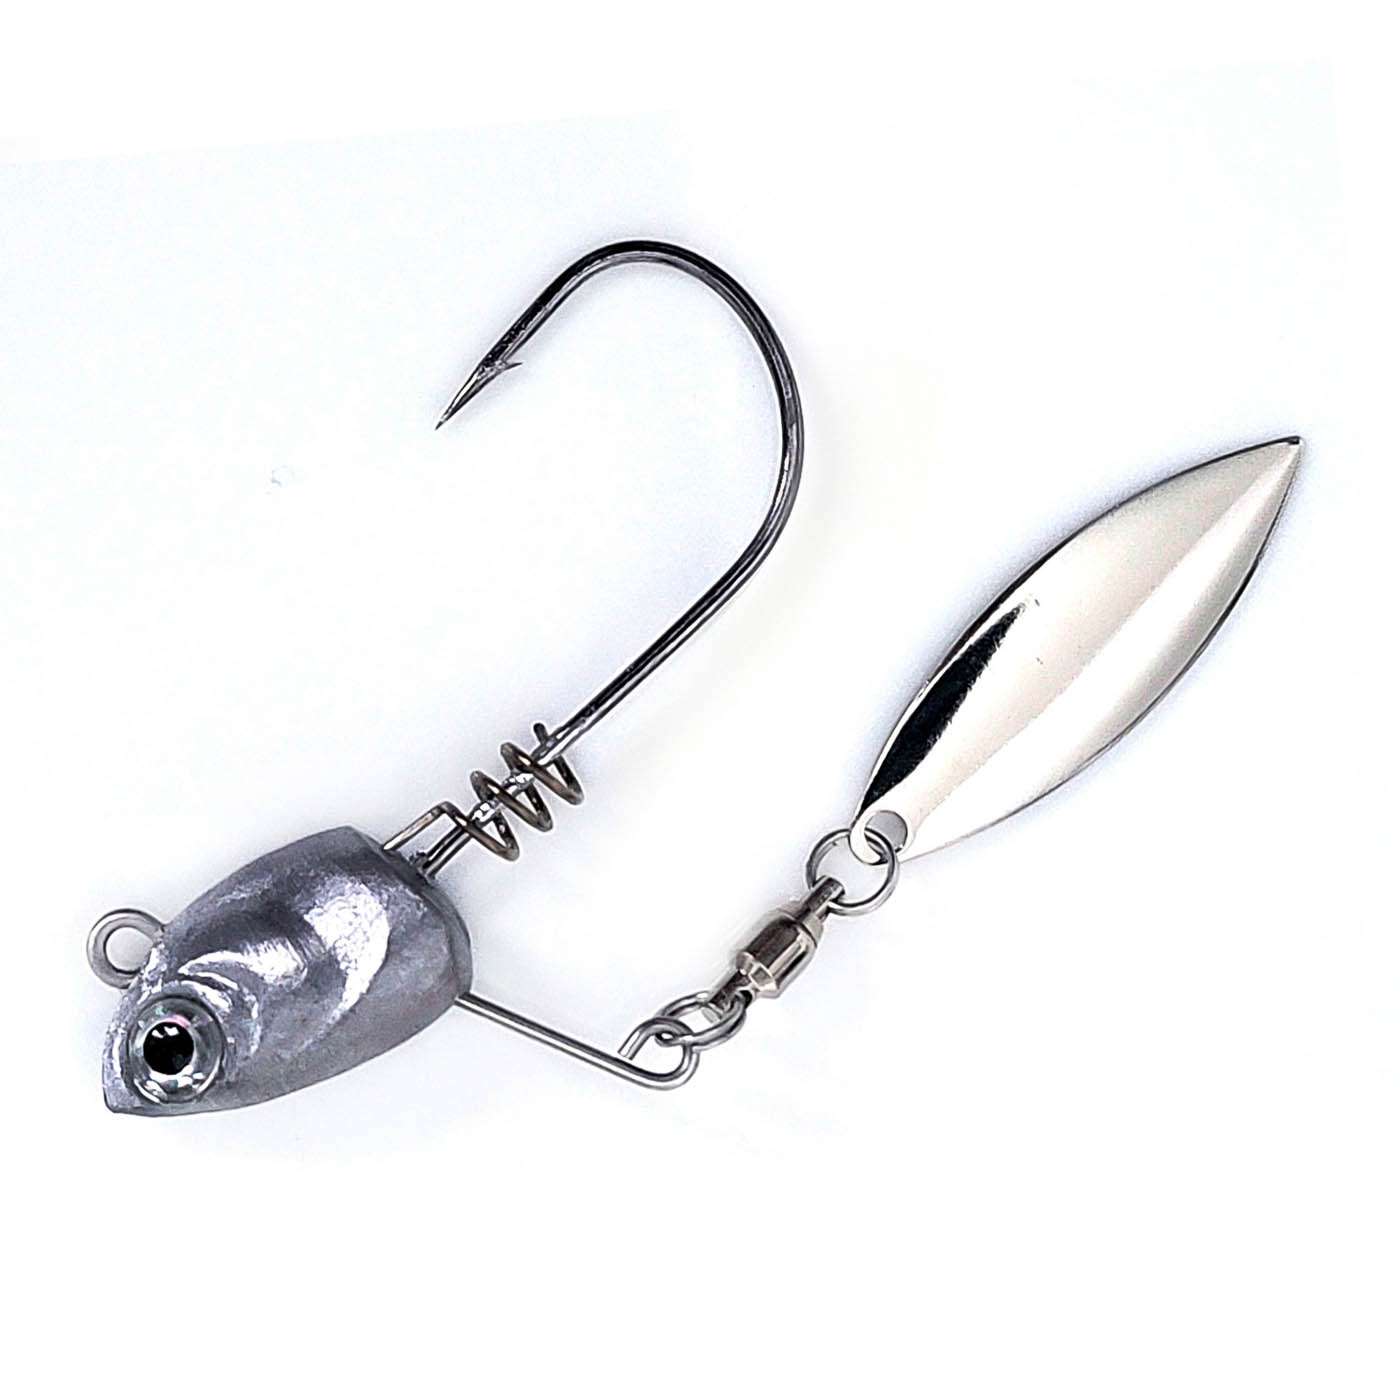 <p><strong>Gamakatsu Under Spin Head Mini</strong></p><p>The Under Spin Head Mini features Gamakatsuâs premium size 1 Finesse Heavy Cover 60-degree hook. The wide gap design means bulkier plastics and have plenty of bite. Ideal for smaller finesse presentations, the head profile is streamlined to glide through cover. Attention-getting recessed lifelike eyes, and the small chrome willow leaf blade result in a combination that fish canât resist. Gamakatsuâs Spring Lock holds swim baits and other plastics gently but firmly, keeping the presentation straight on the hook. $4.46. <a href=